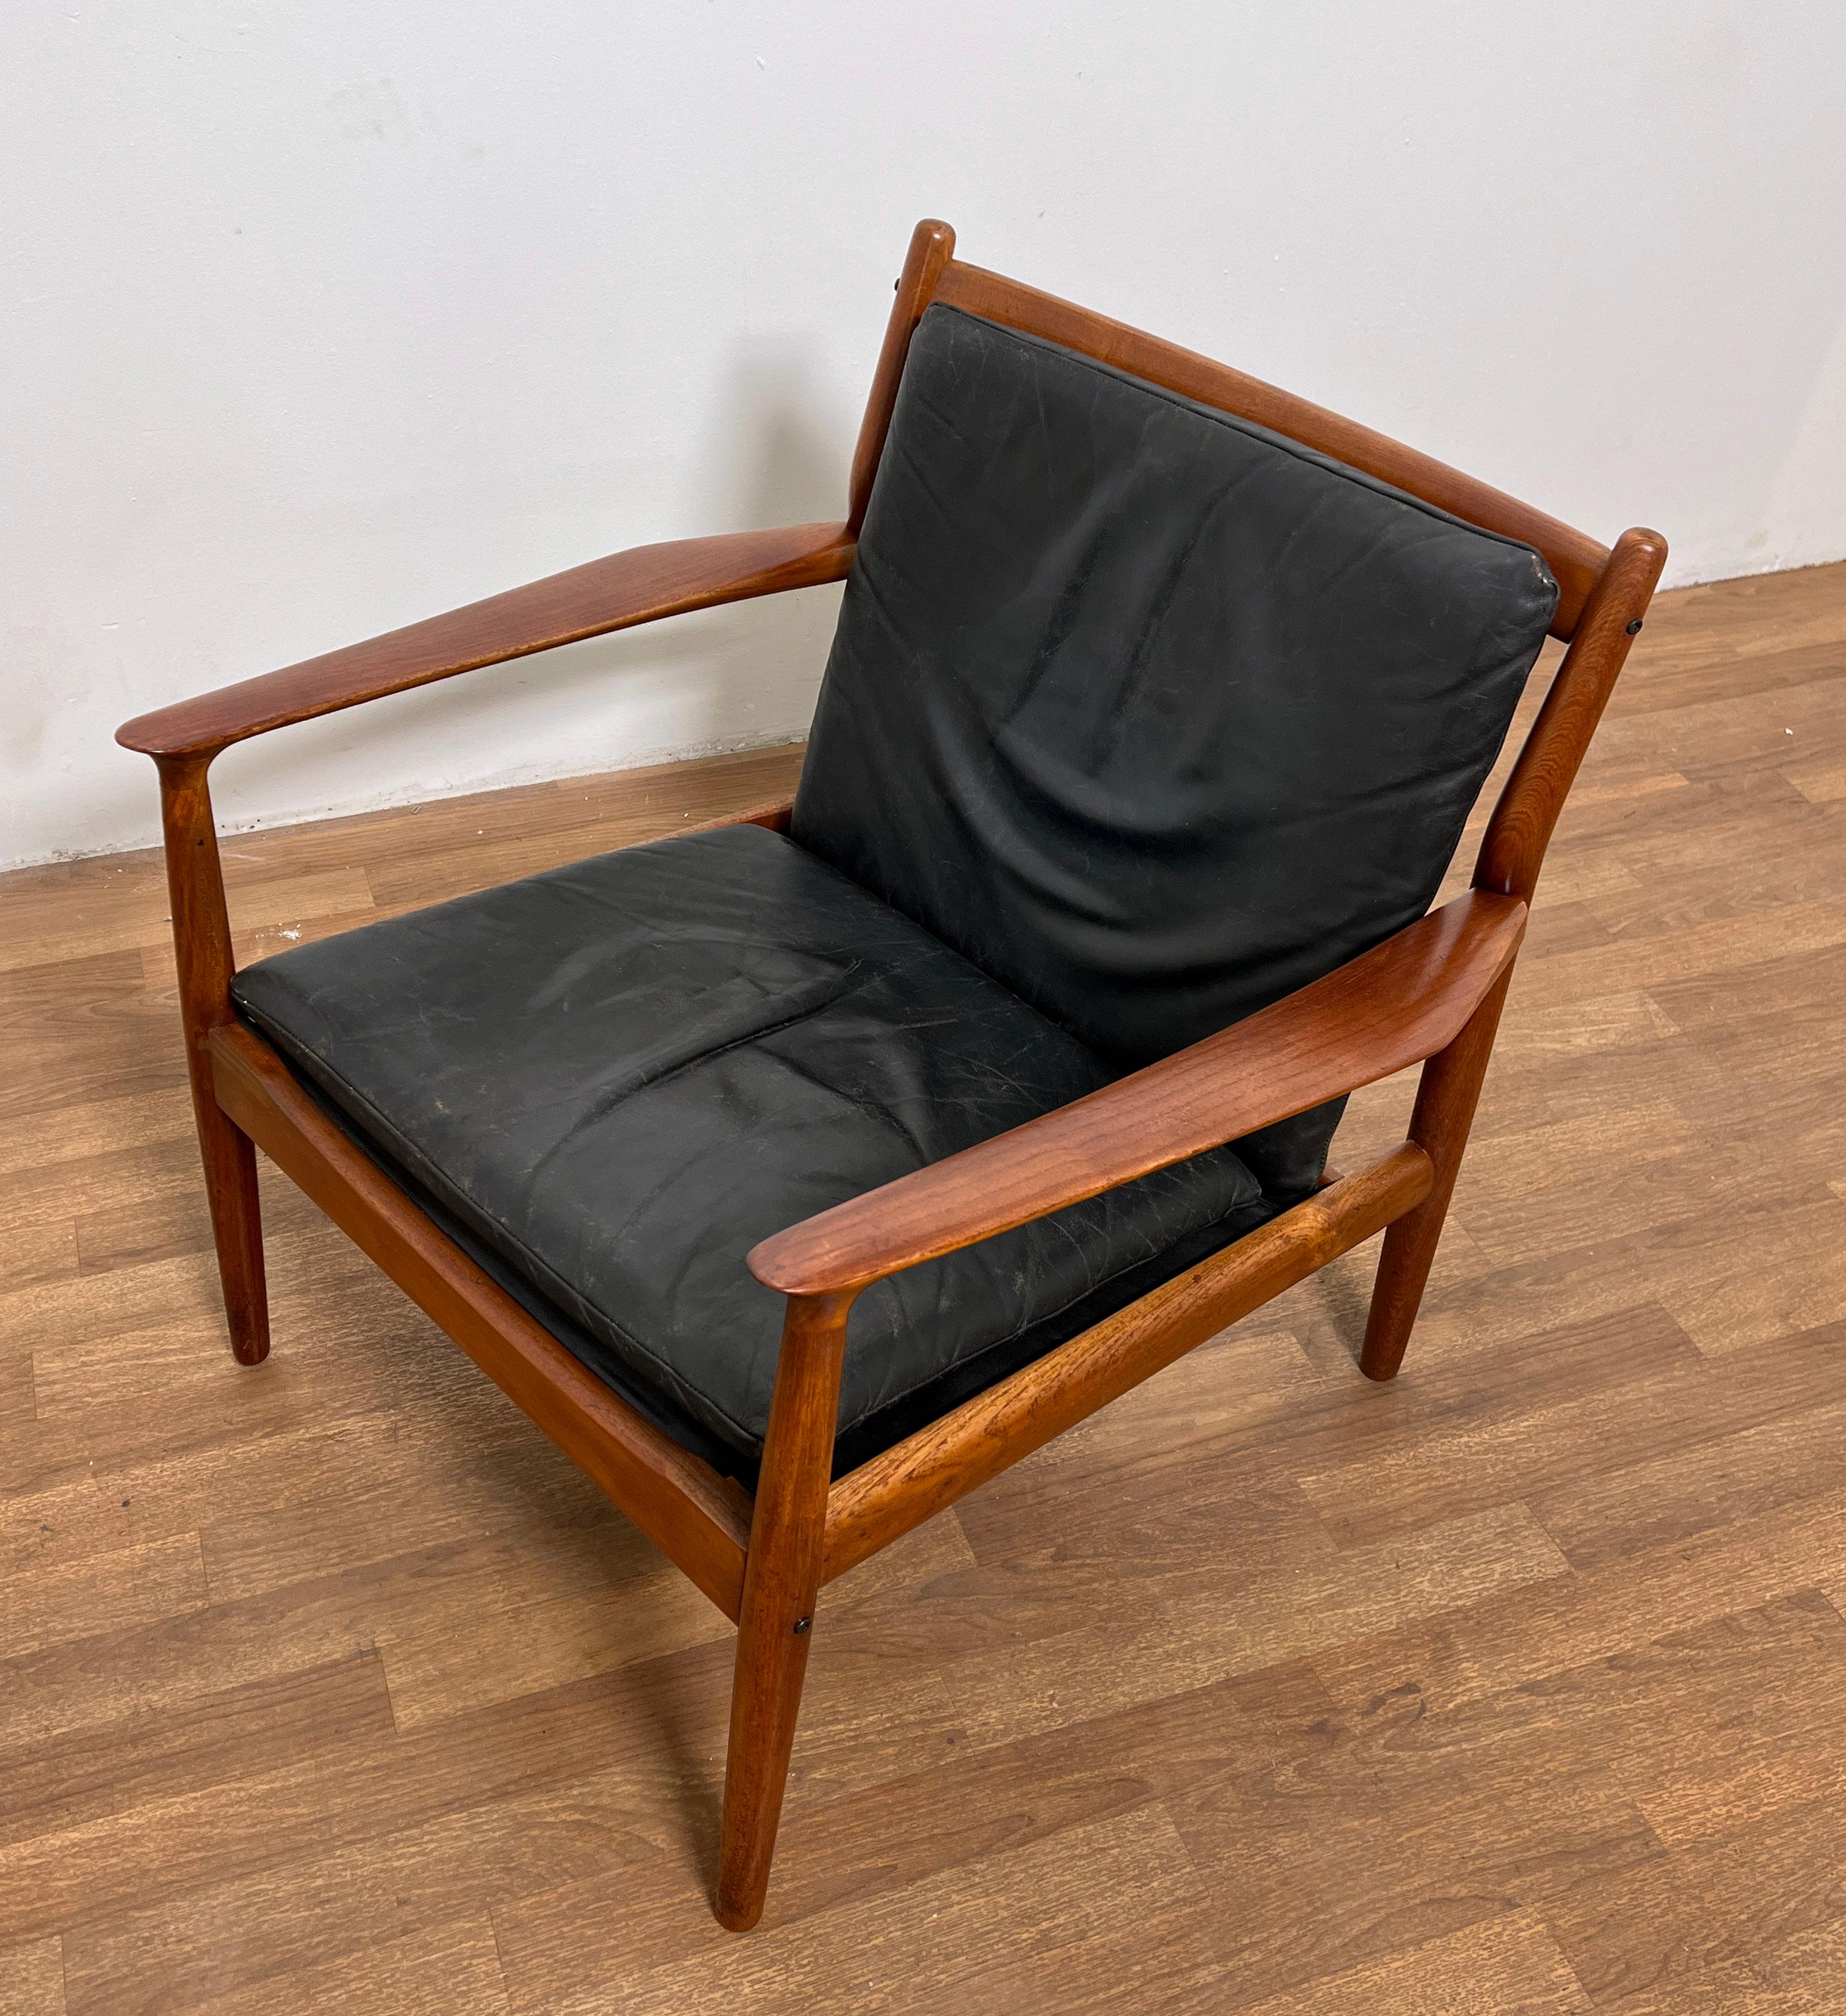 Svend Aage Eriksen for Glostrup Danish Teak and Leather Lounge Chair Circa 1960s For Sale 6